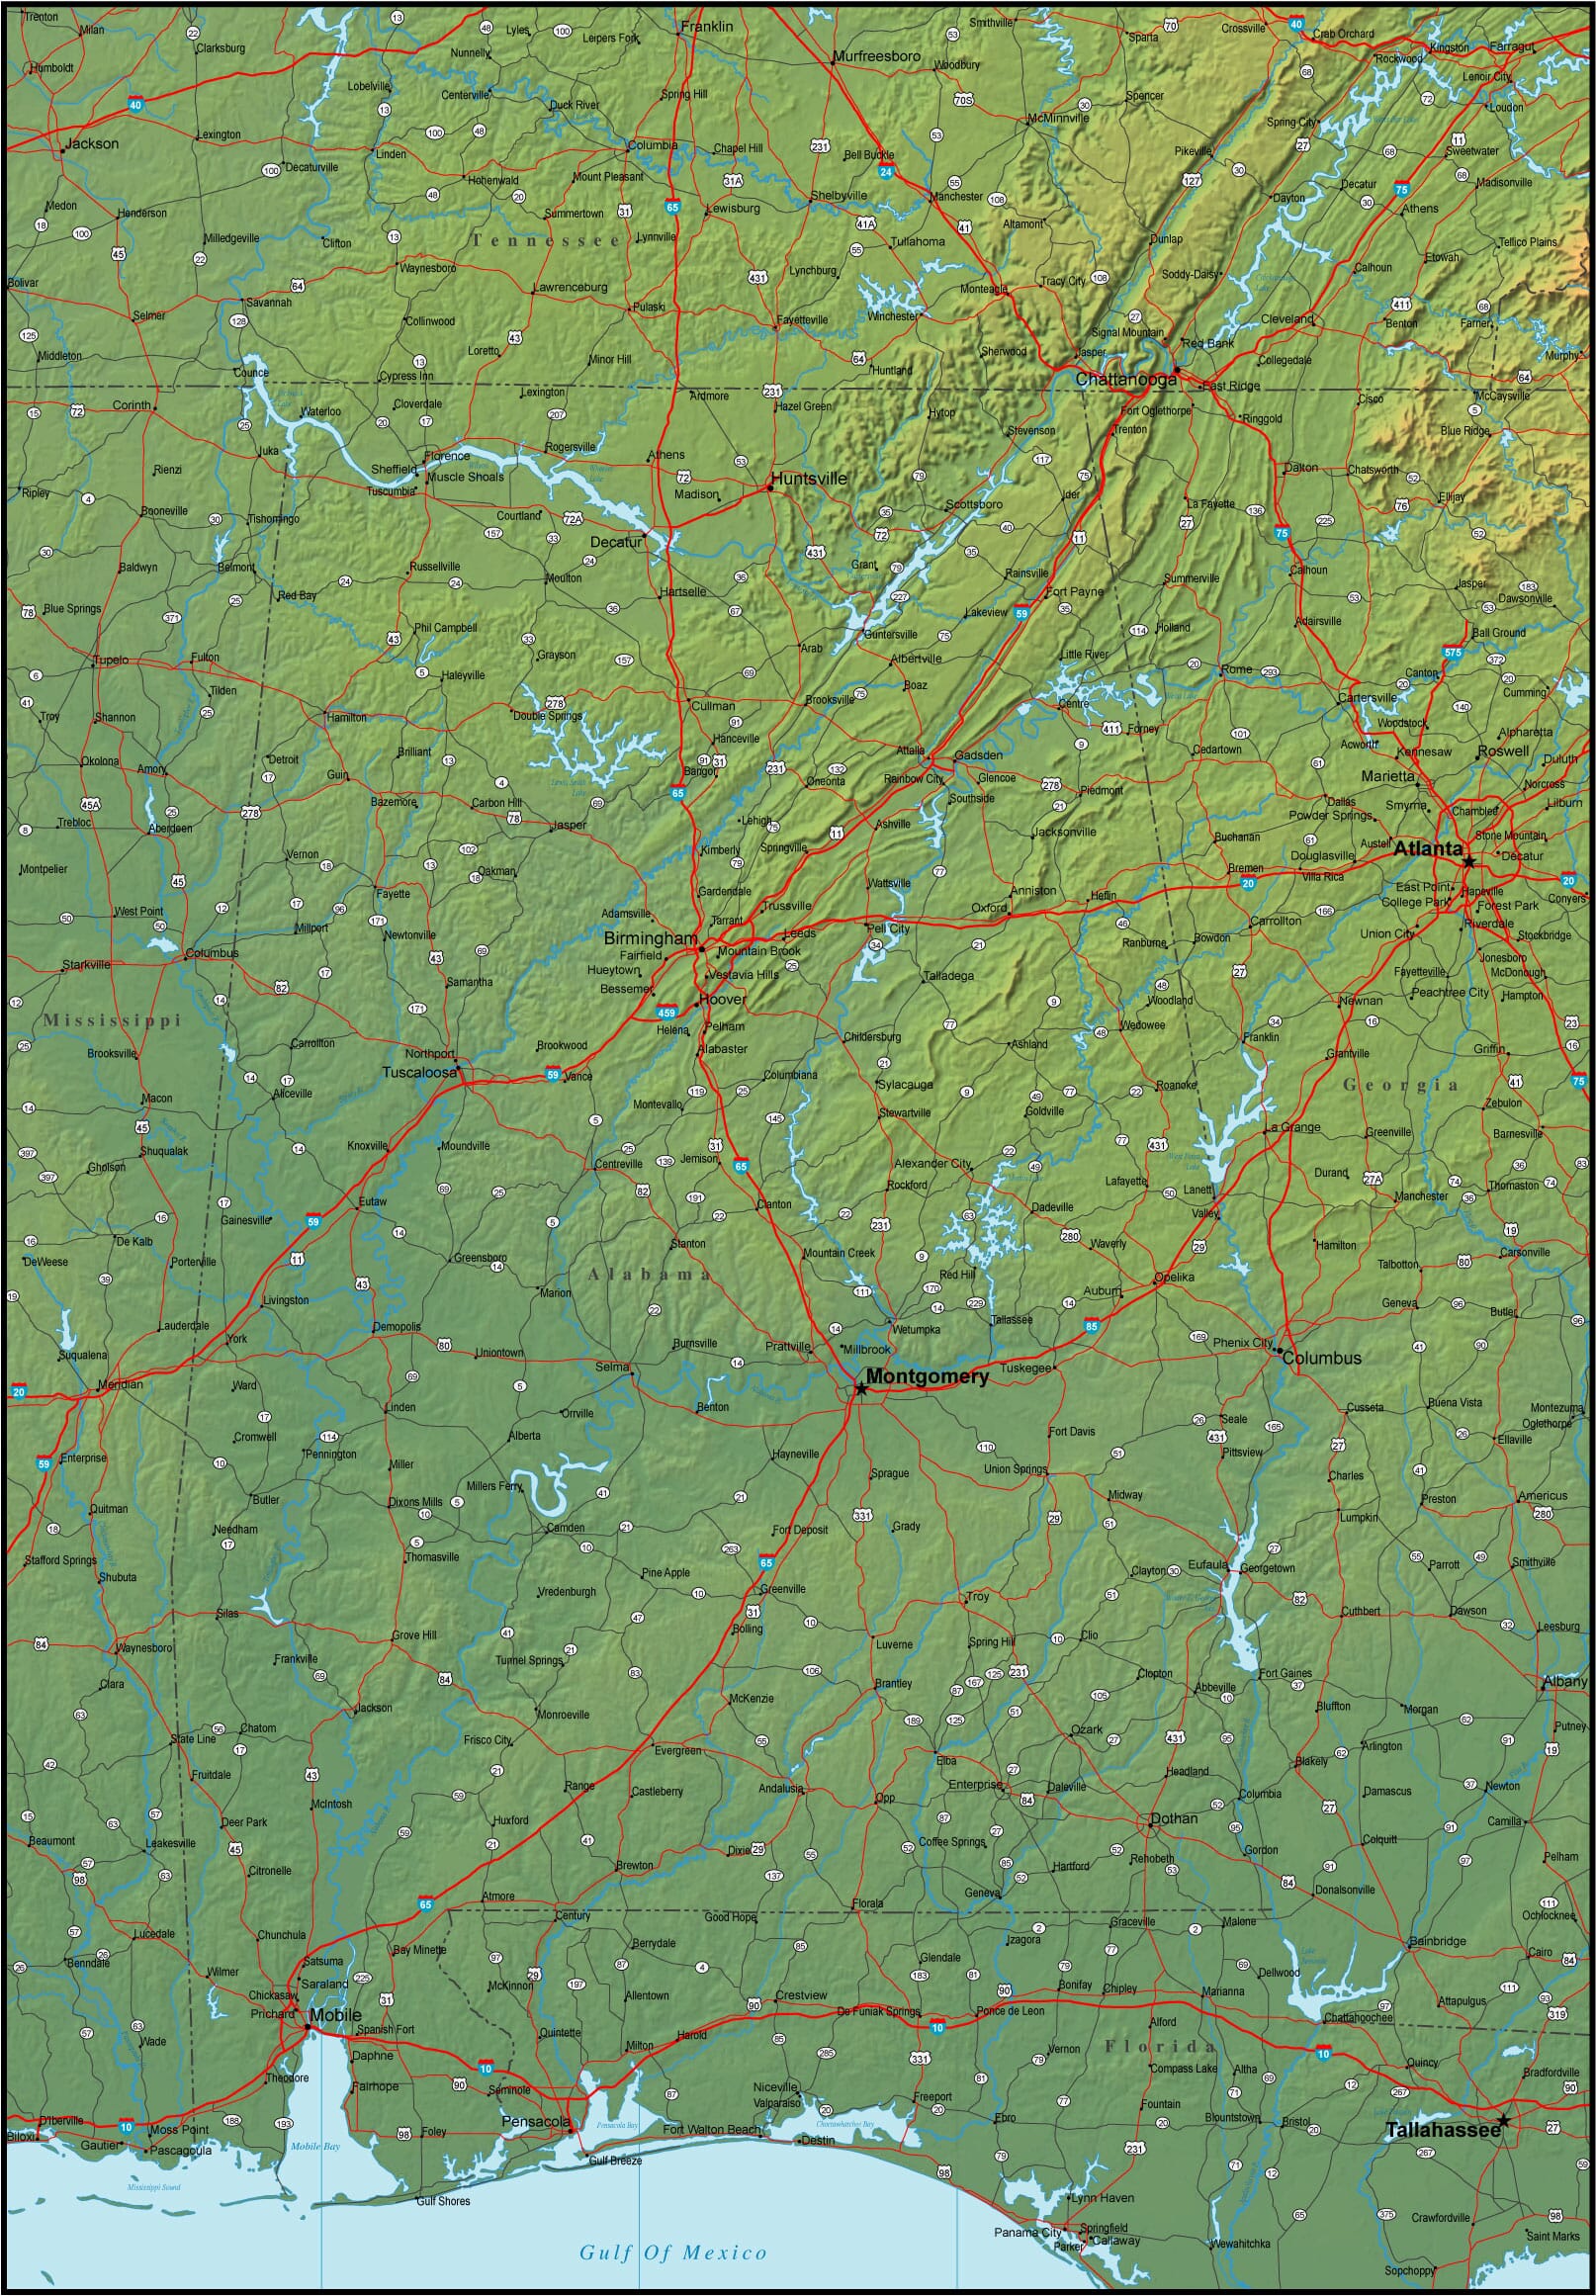 Map of Alabama and the Surrounding Region